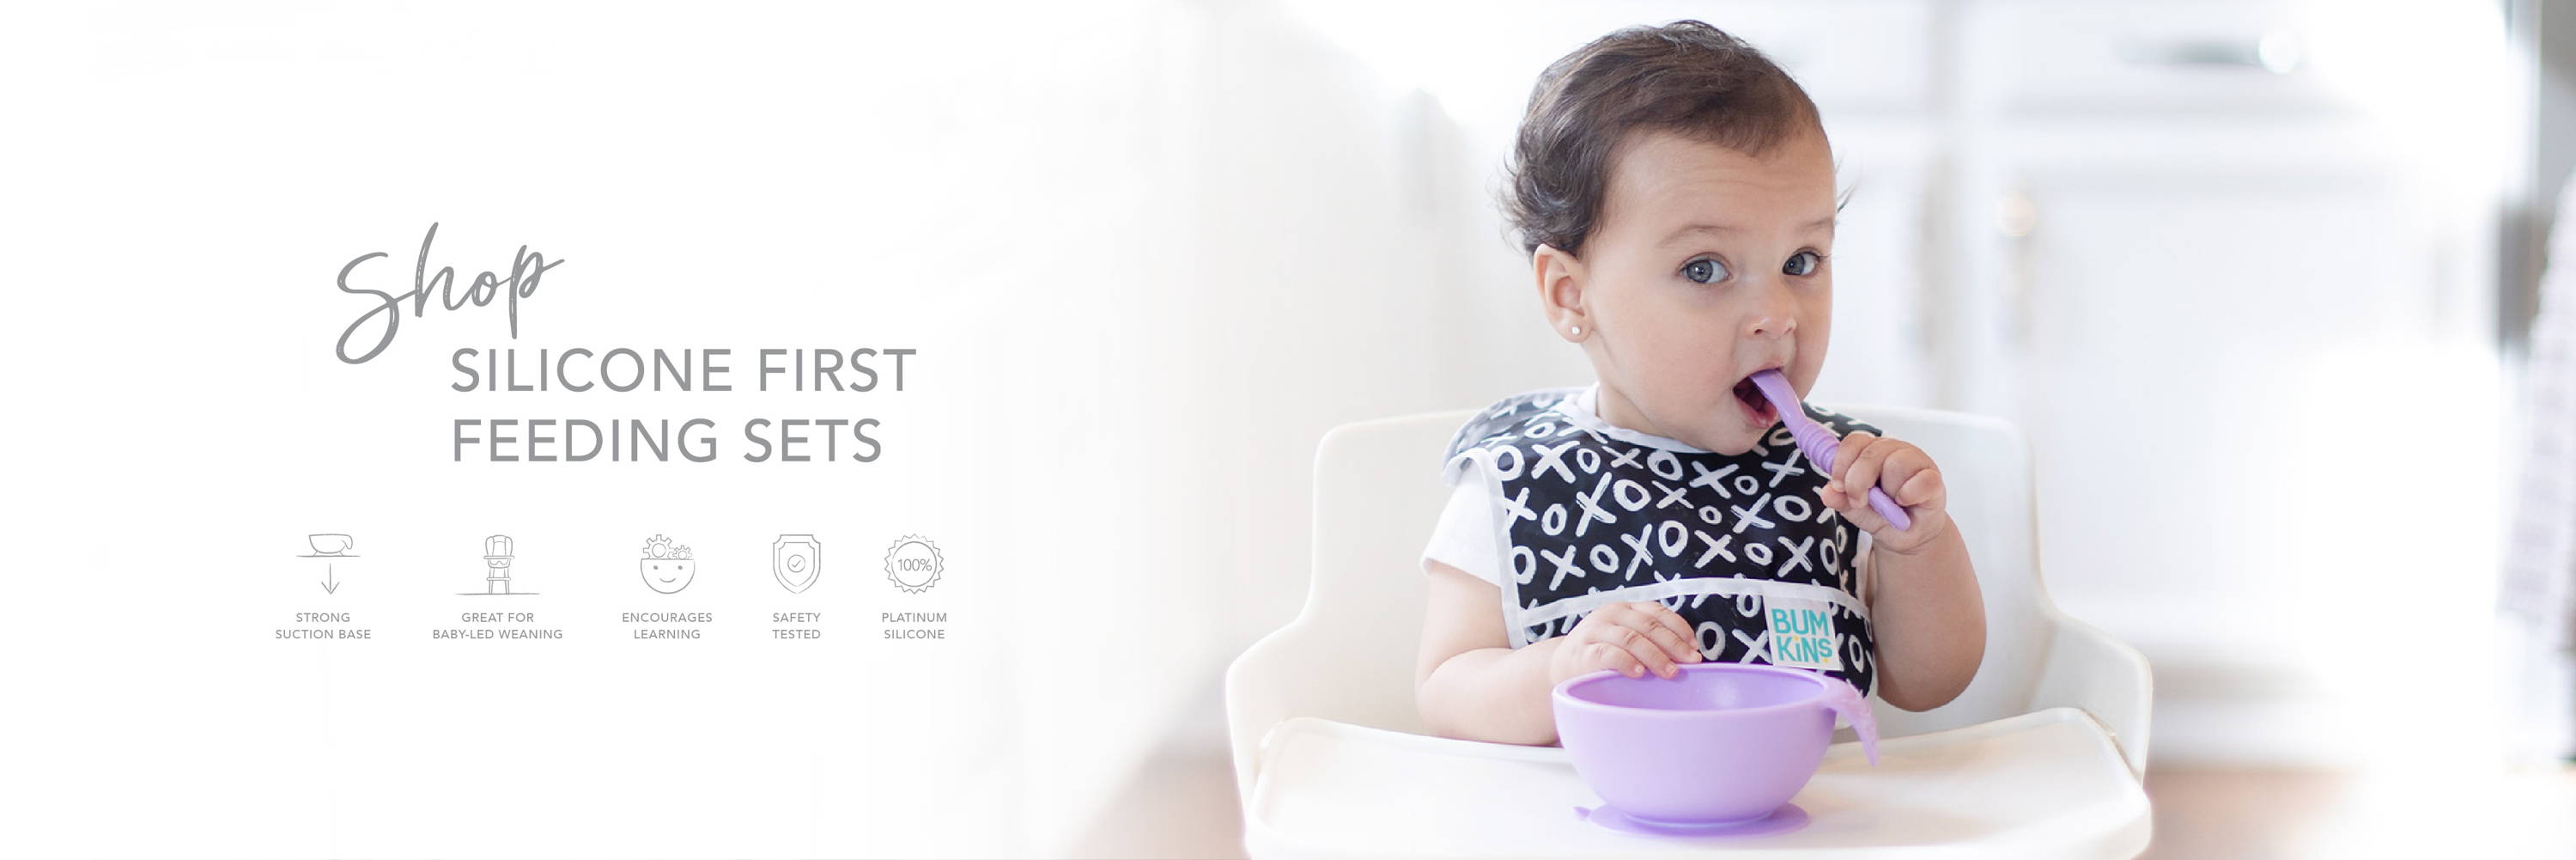 shop silicone first feeding sets, strong suction base, great for baby-led weaning, encourages learning, safety tested, platinum silicone